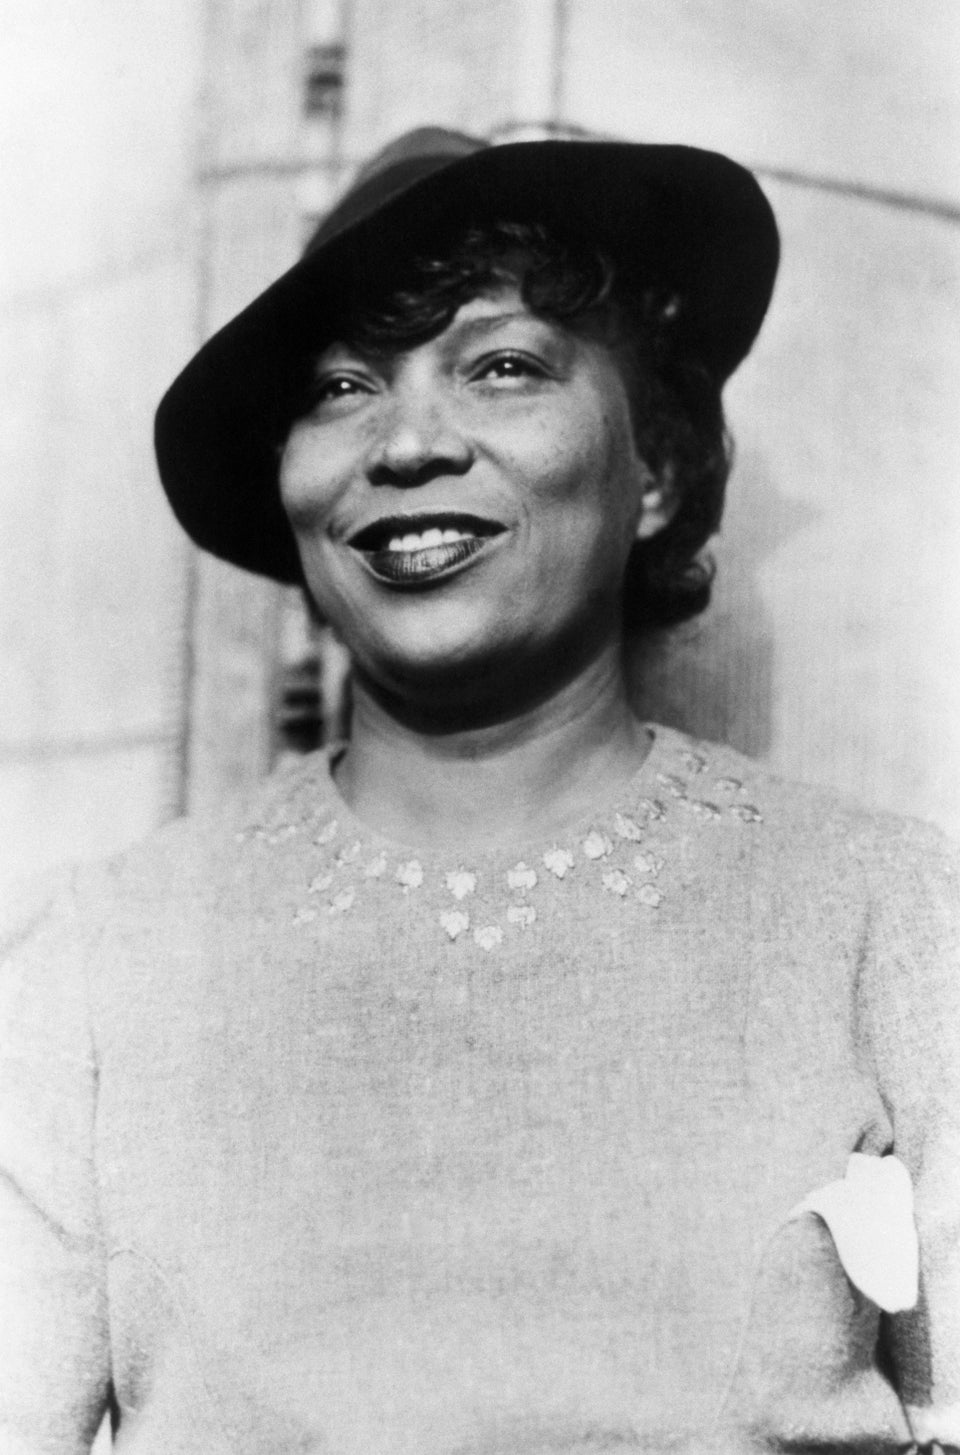 New Novel From Zora Neale Hurston To Be Published In 2018